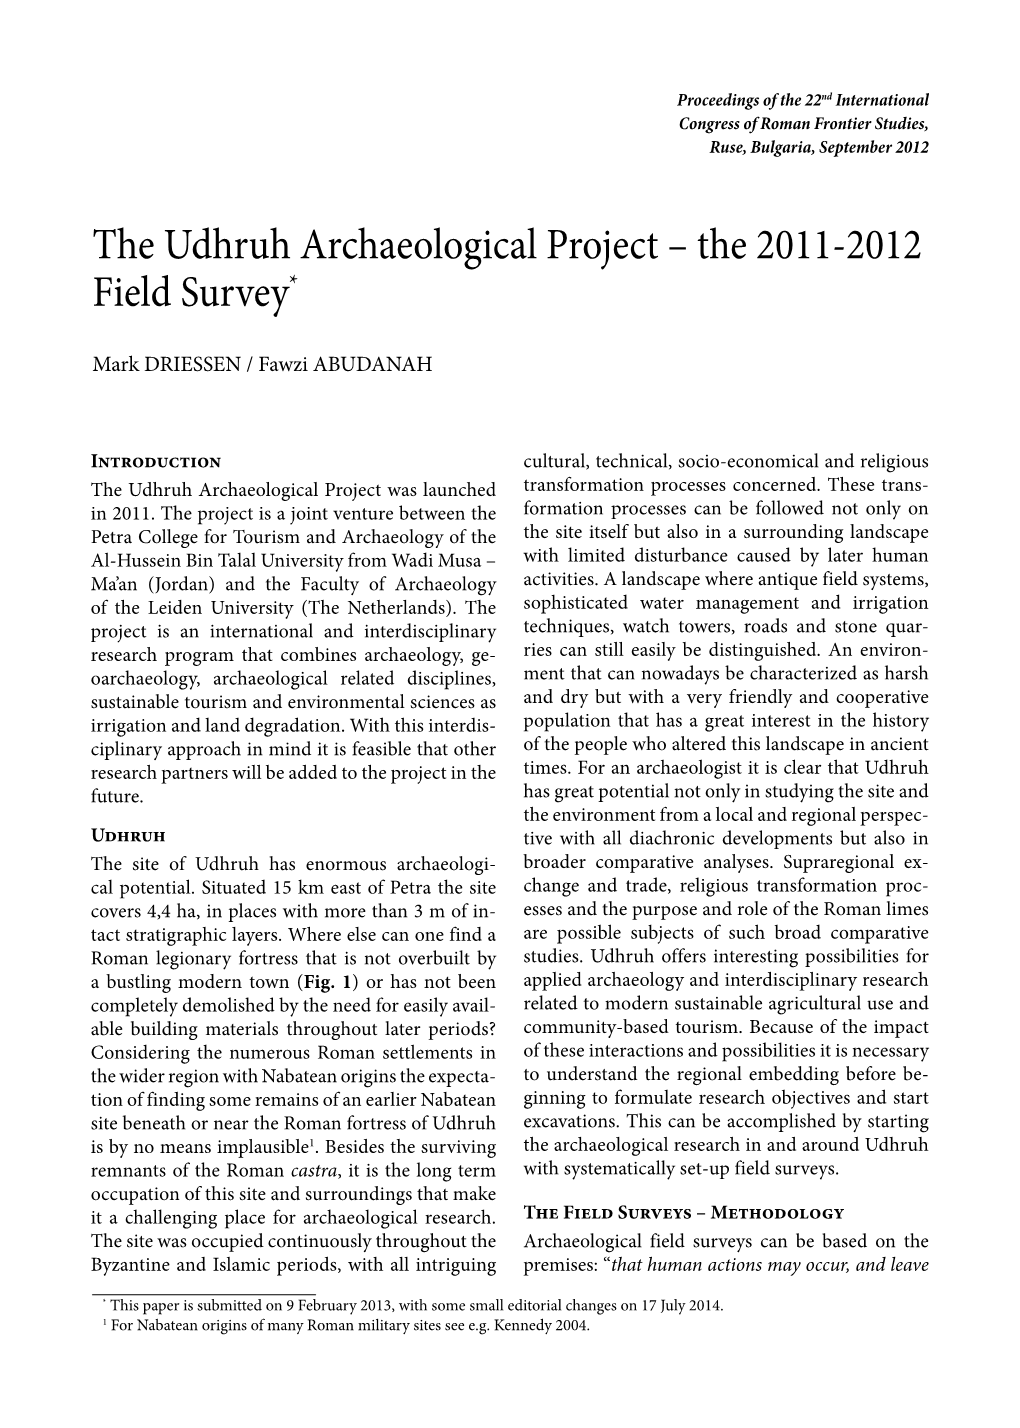 The Udhruh Archaeological Project – the 2011-2012 Field Survey*